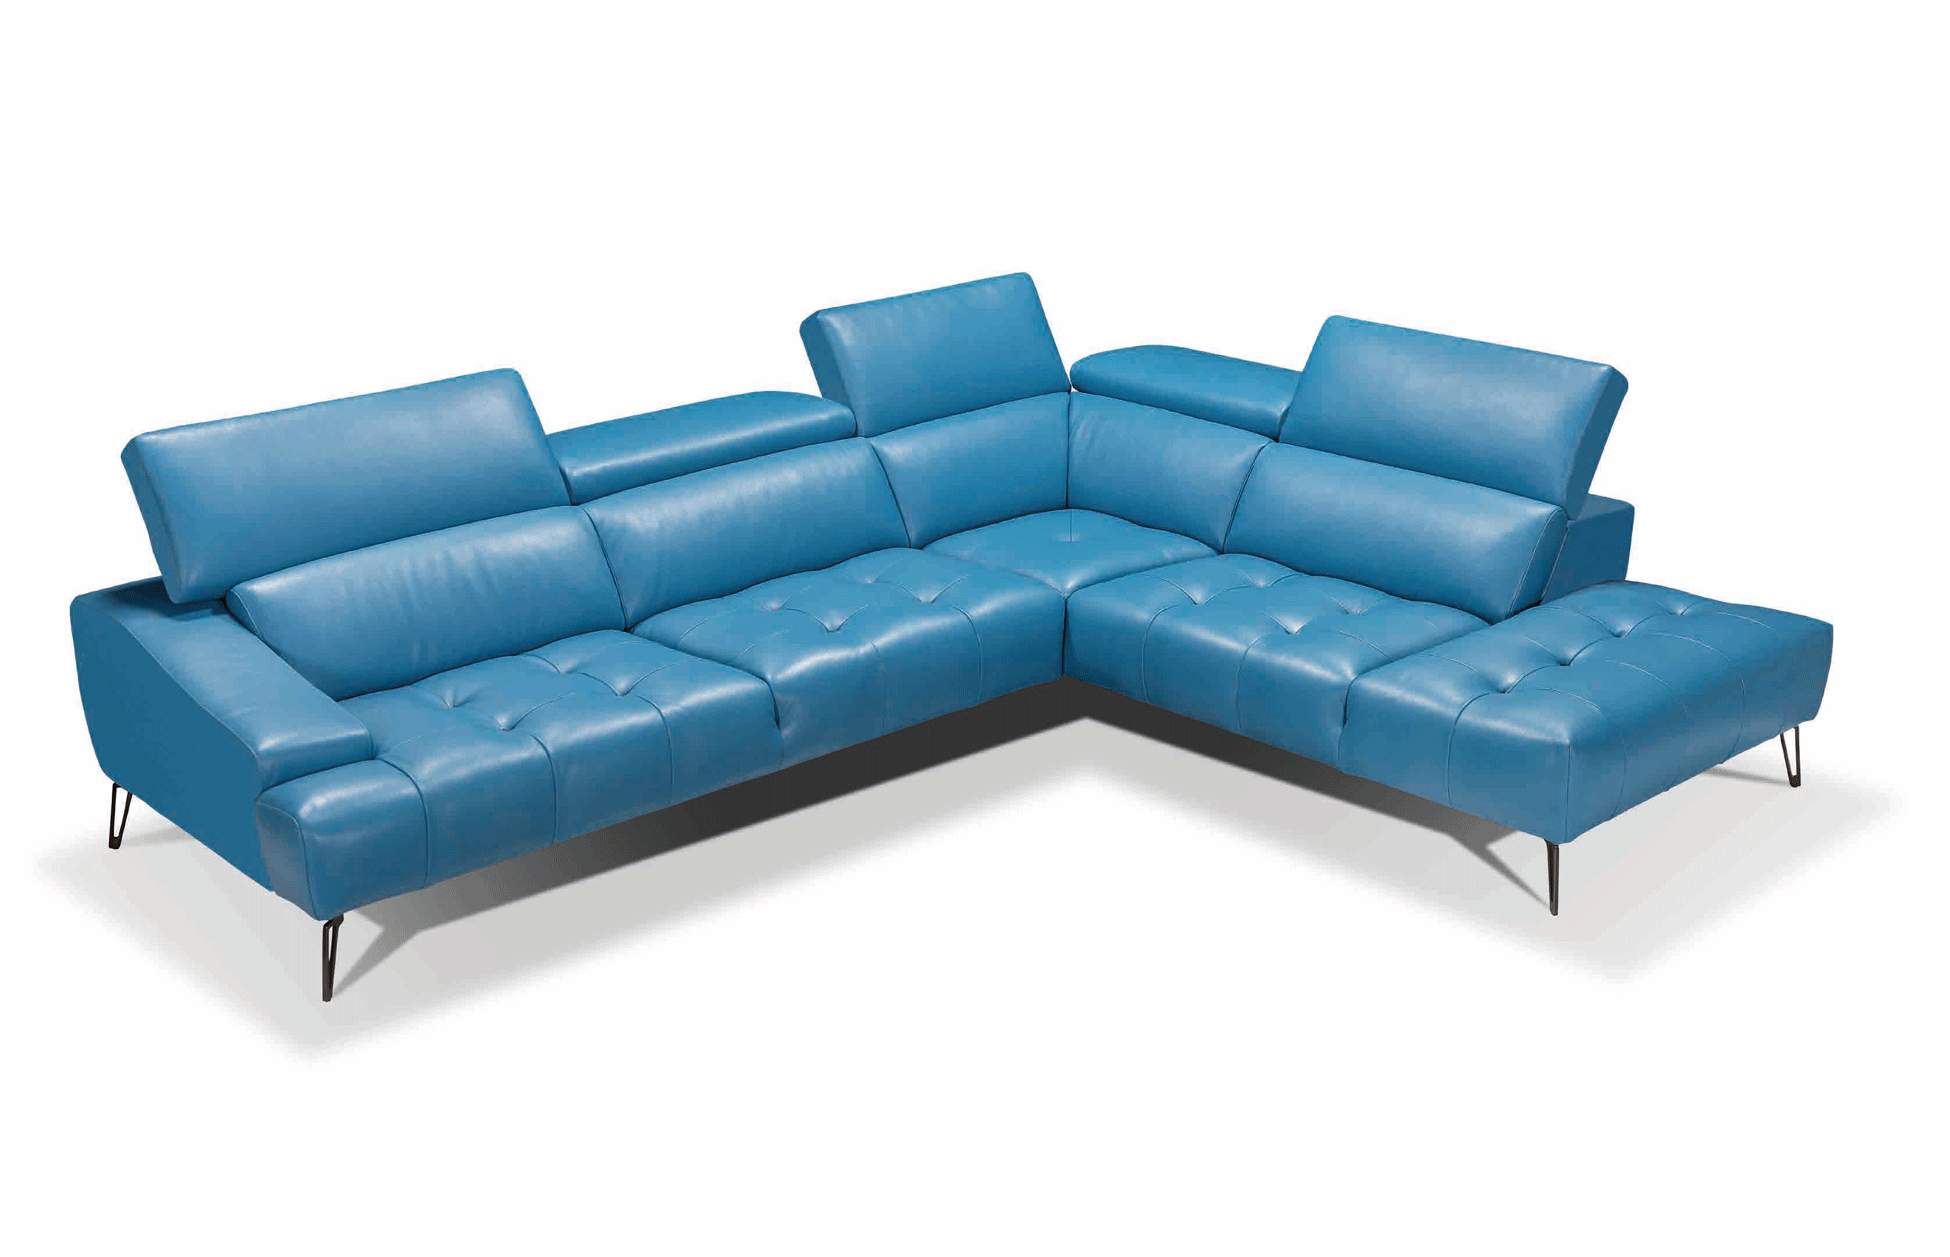 Living Room Furniture Reclining and Sliding Seats Sets Opera Living room